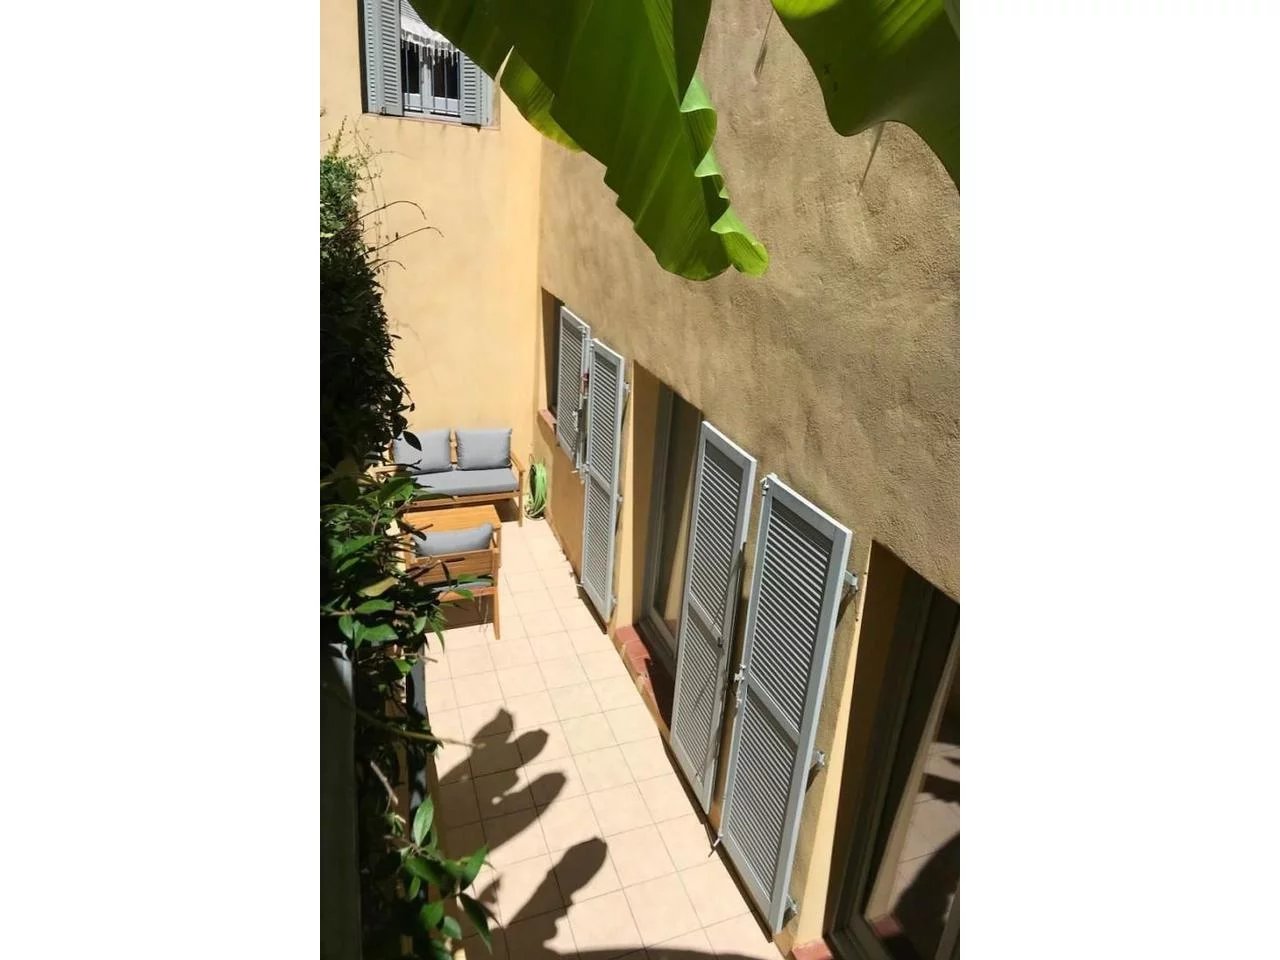 Appartement  2 Rooms 52.66m2  for sale   288 000 €